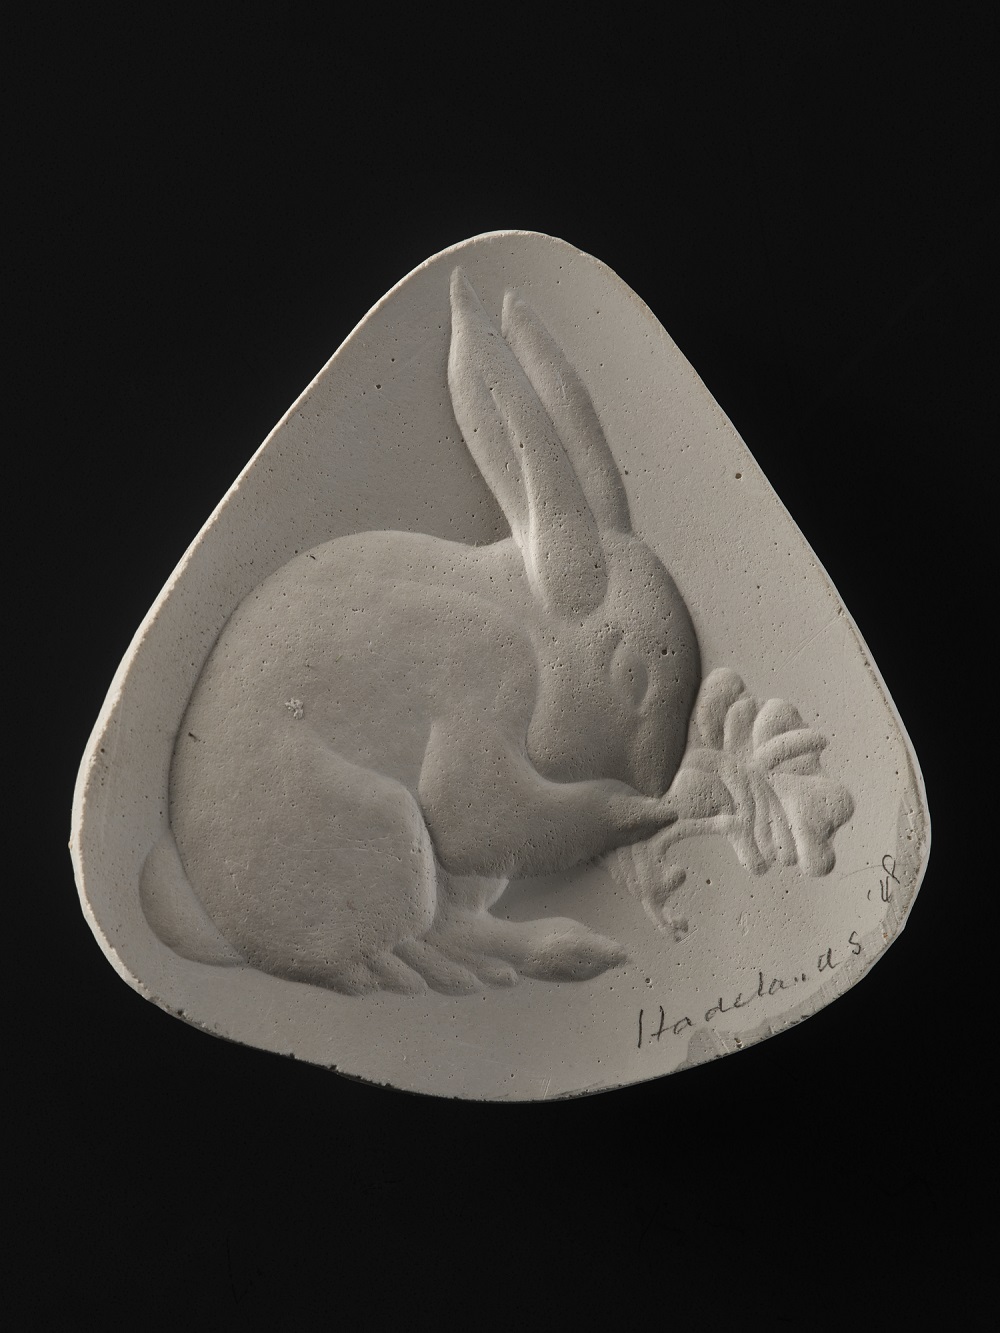 A white ceramic piece, triangle-shaped like a guitar pick, against a black background. A raised carving of a simplified rabbit nibbling on a leaf takes up most of the curved inner surface.